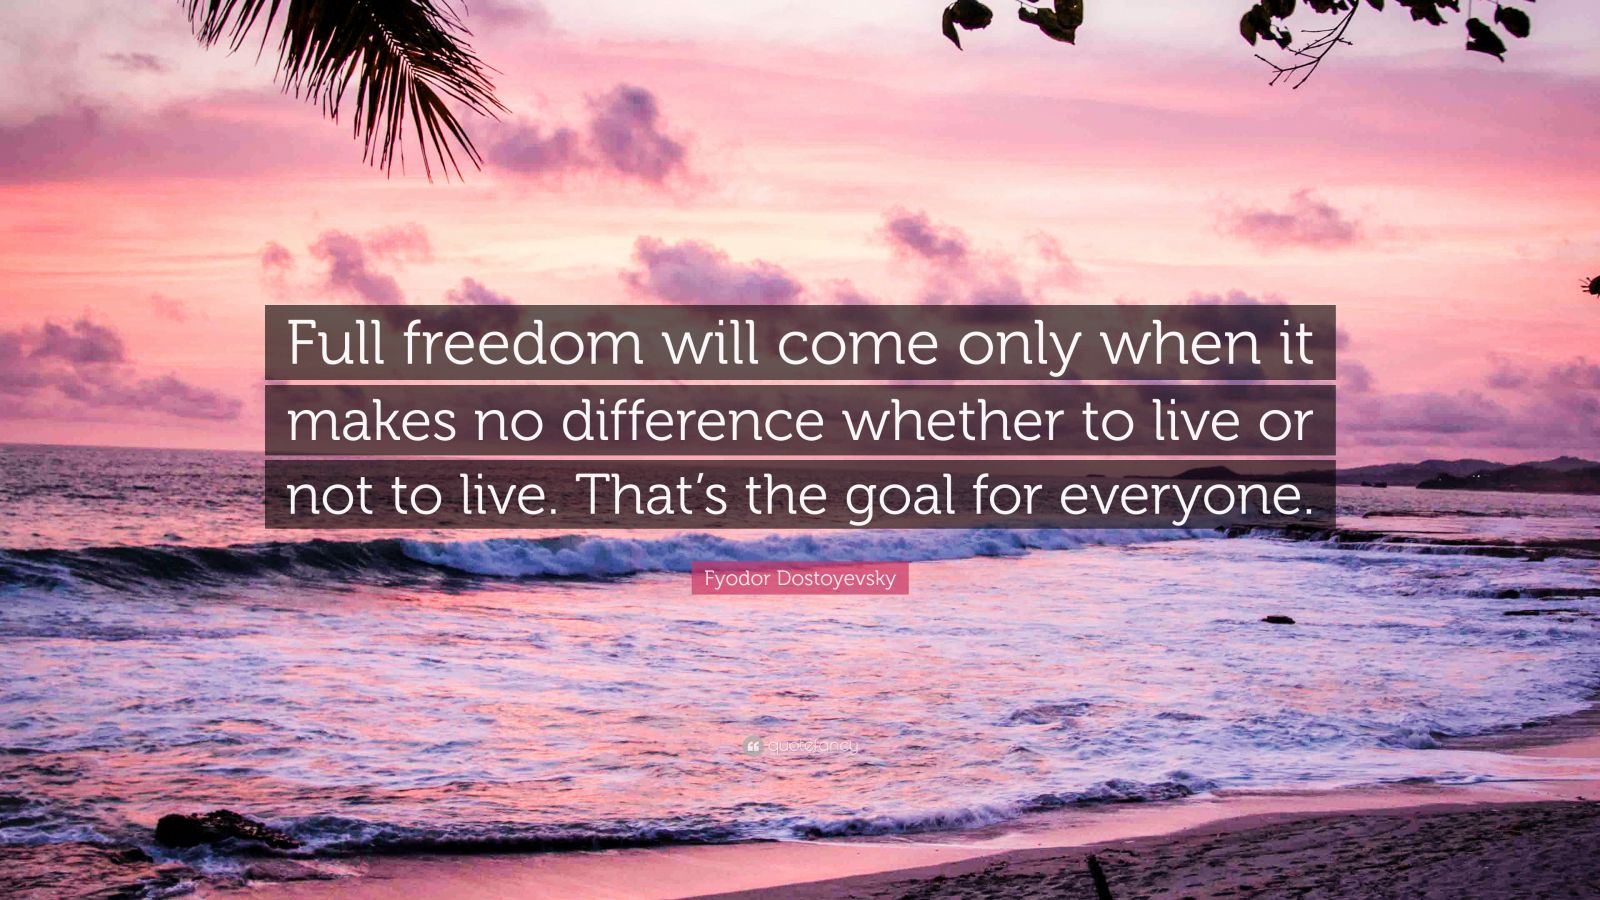 https://quotefancy.com/media/wallpaper/1600x900/7875559-Fyodor-Dostoyevsky-Quote-Full-freedom-will-come-only-when-it-makes.jpg